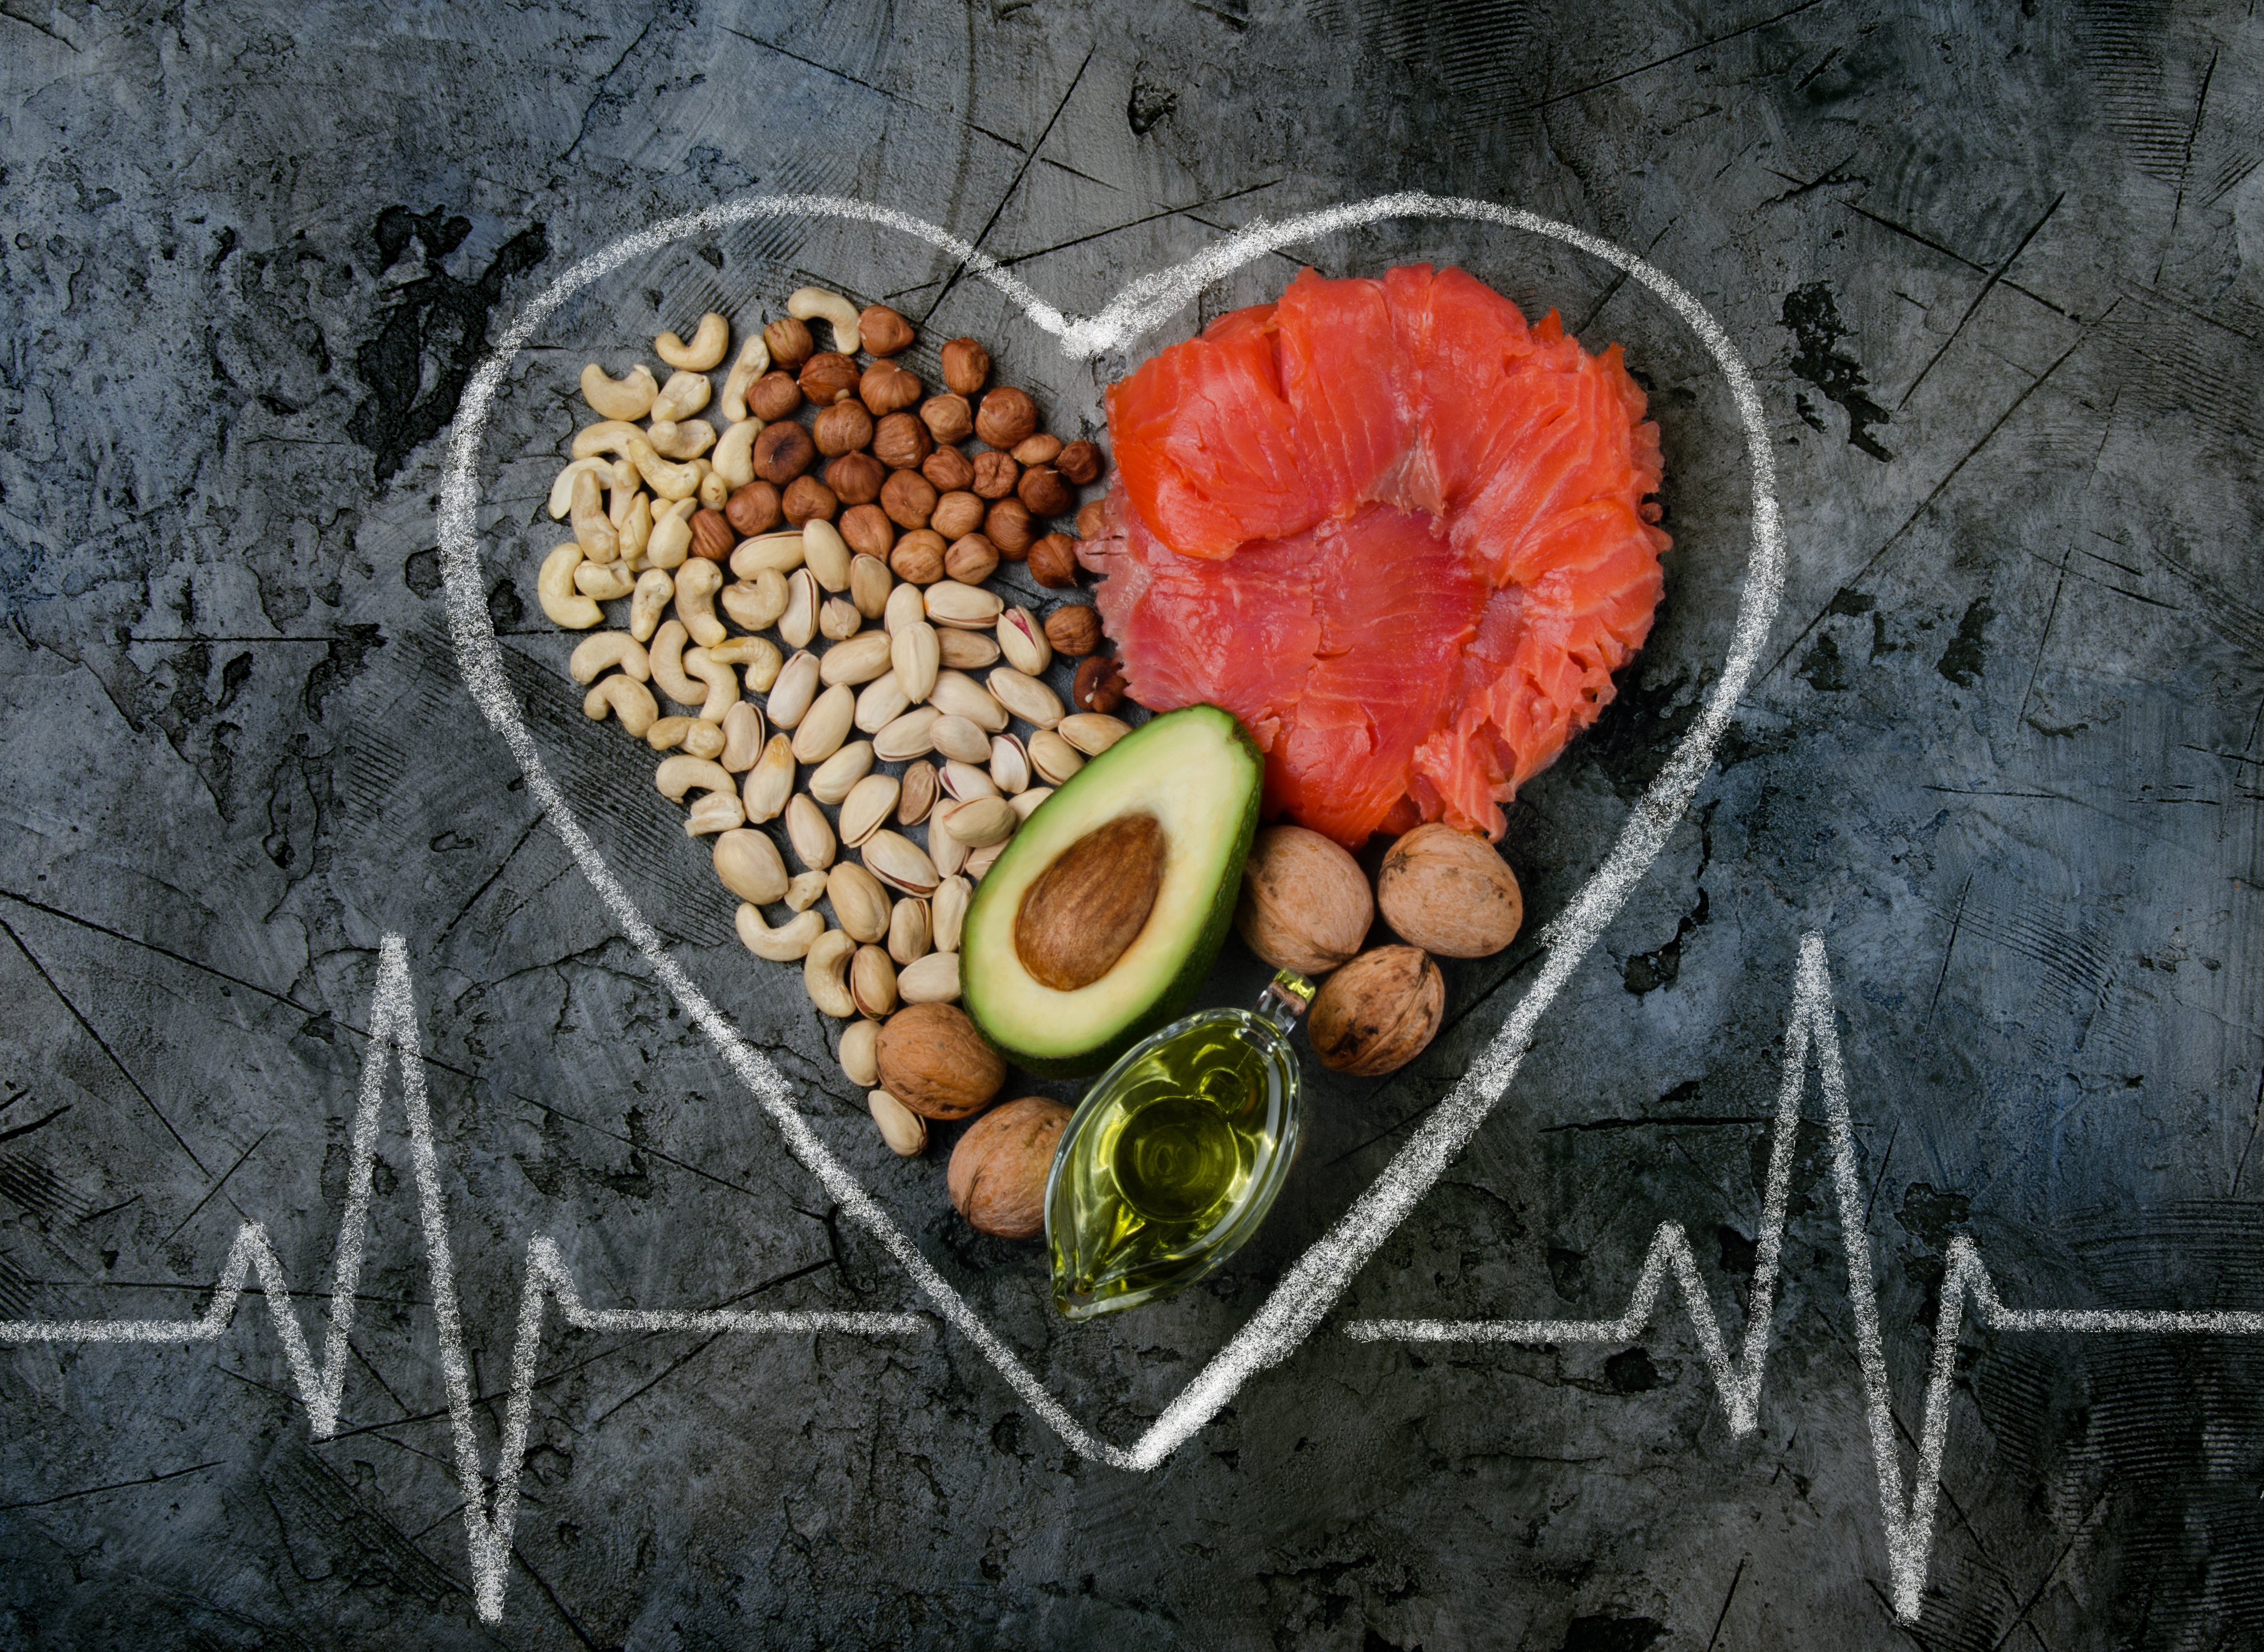 Nuts, almonds, avocado, olive oil, and salmon sit inside the outline of a heart